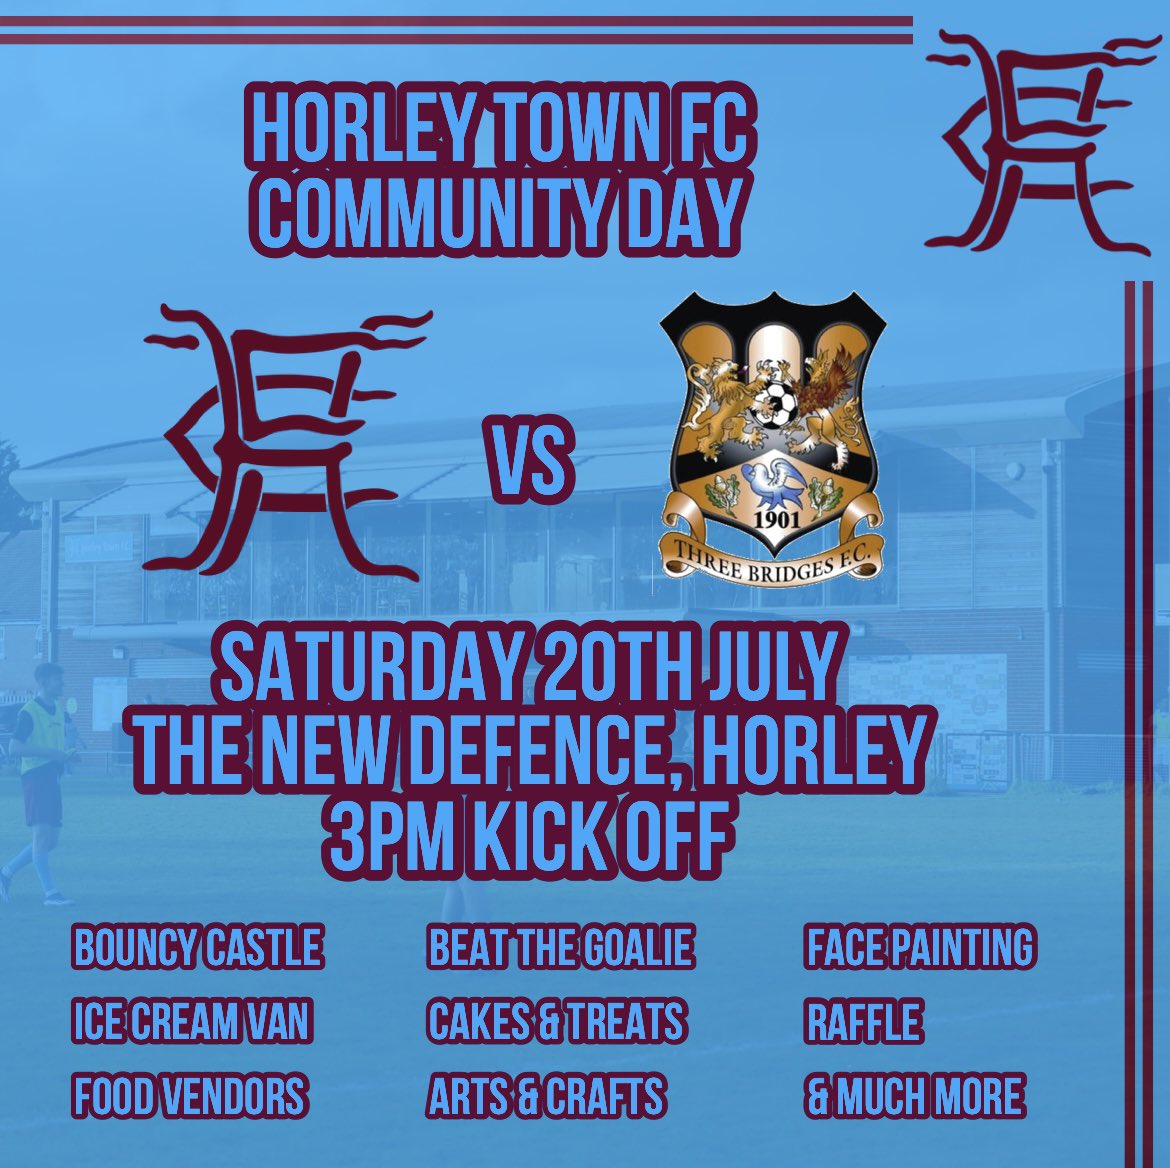 𝟯/𝟱: 𝗛𝗧𝗙𝗖 𝗖𝗼𝗺𝗺𝘂𝗻𝗶𝘁𝘆 𝗗𝗮𝘆

Announcing our first HTFC Community Day! 

Saturday 20th July we will host @ThreeBridgesFC at The New Defence.

𝗙𝗿𝗲𝗲 𝗘𝗻𝘁𝗿𝘆 𝗧𝗼 𝗔𝗹𝗹!

There will be inflatables, beat the goalie, face painting, sweet treats & more.

#HTFC🟣🔵